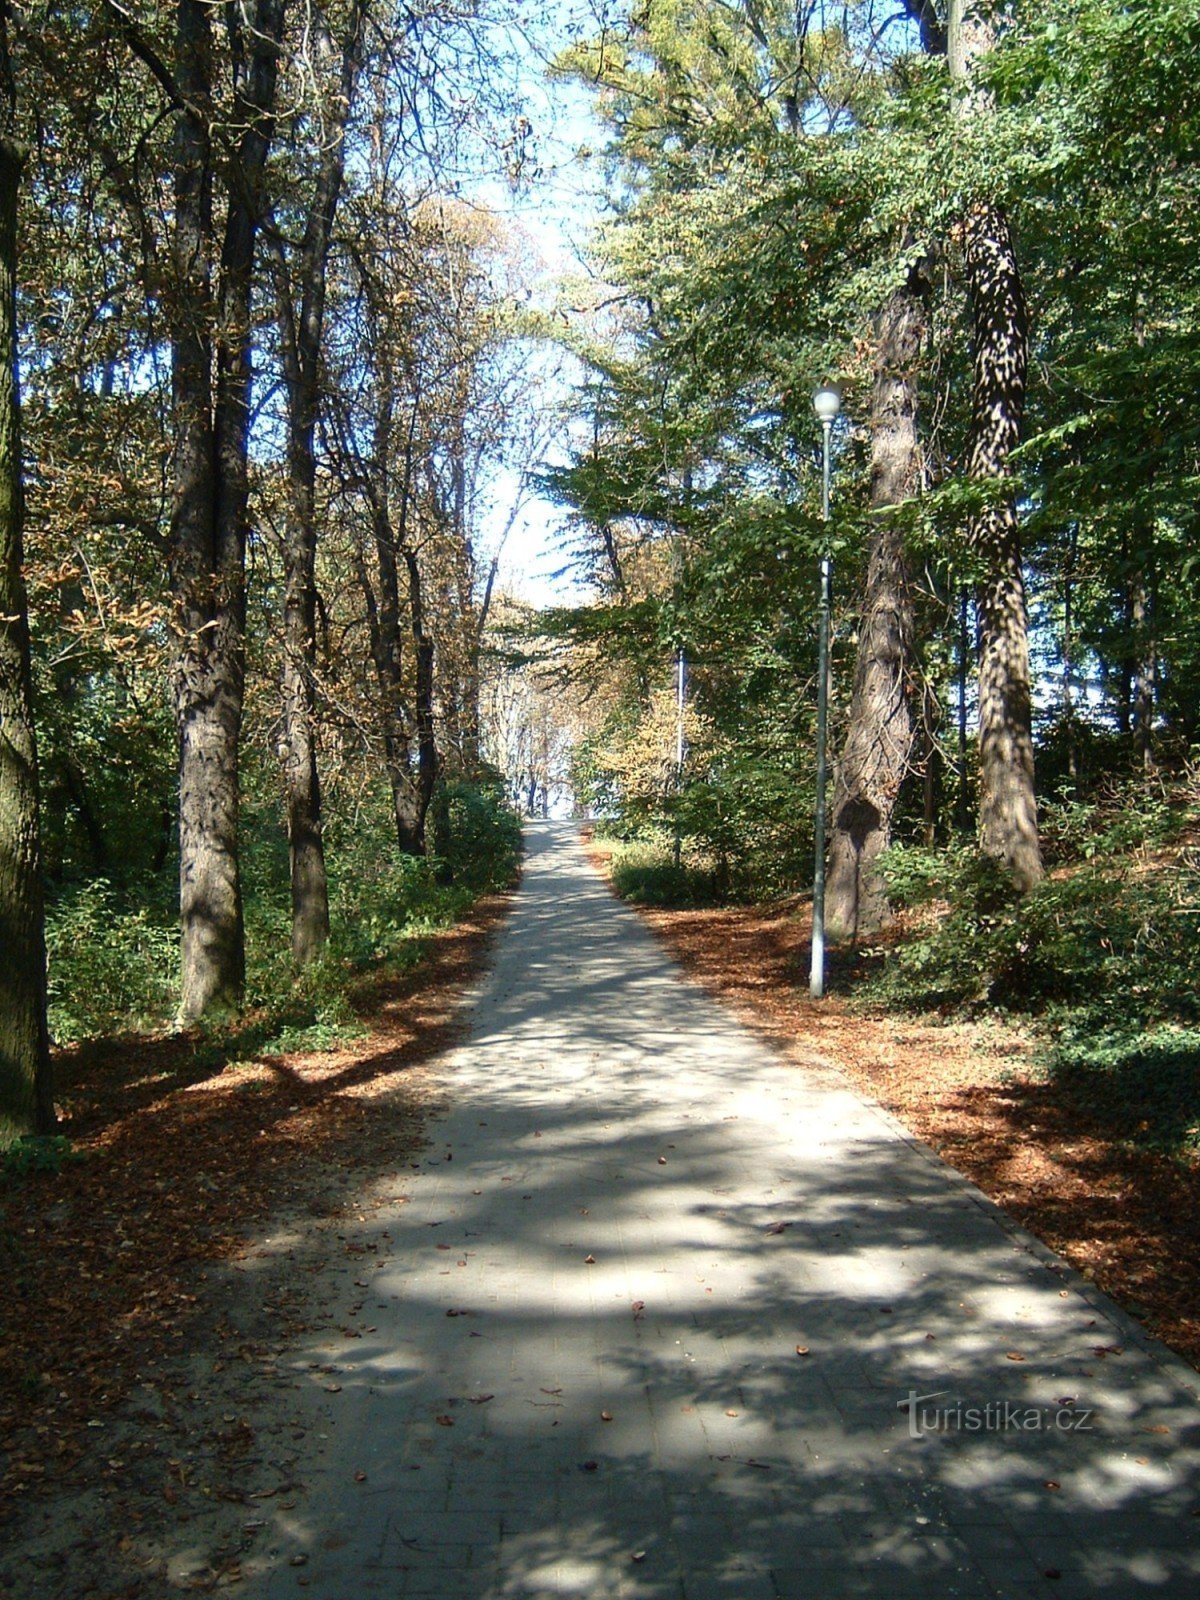 Access road to the castle